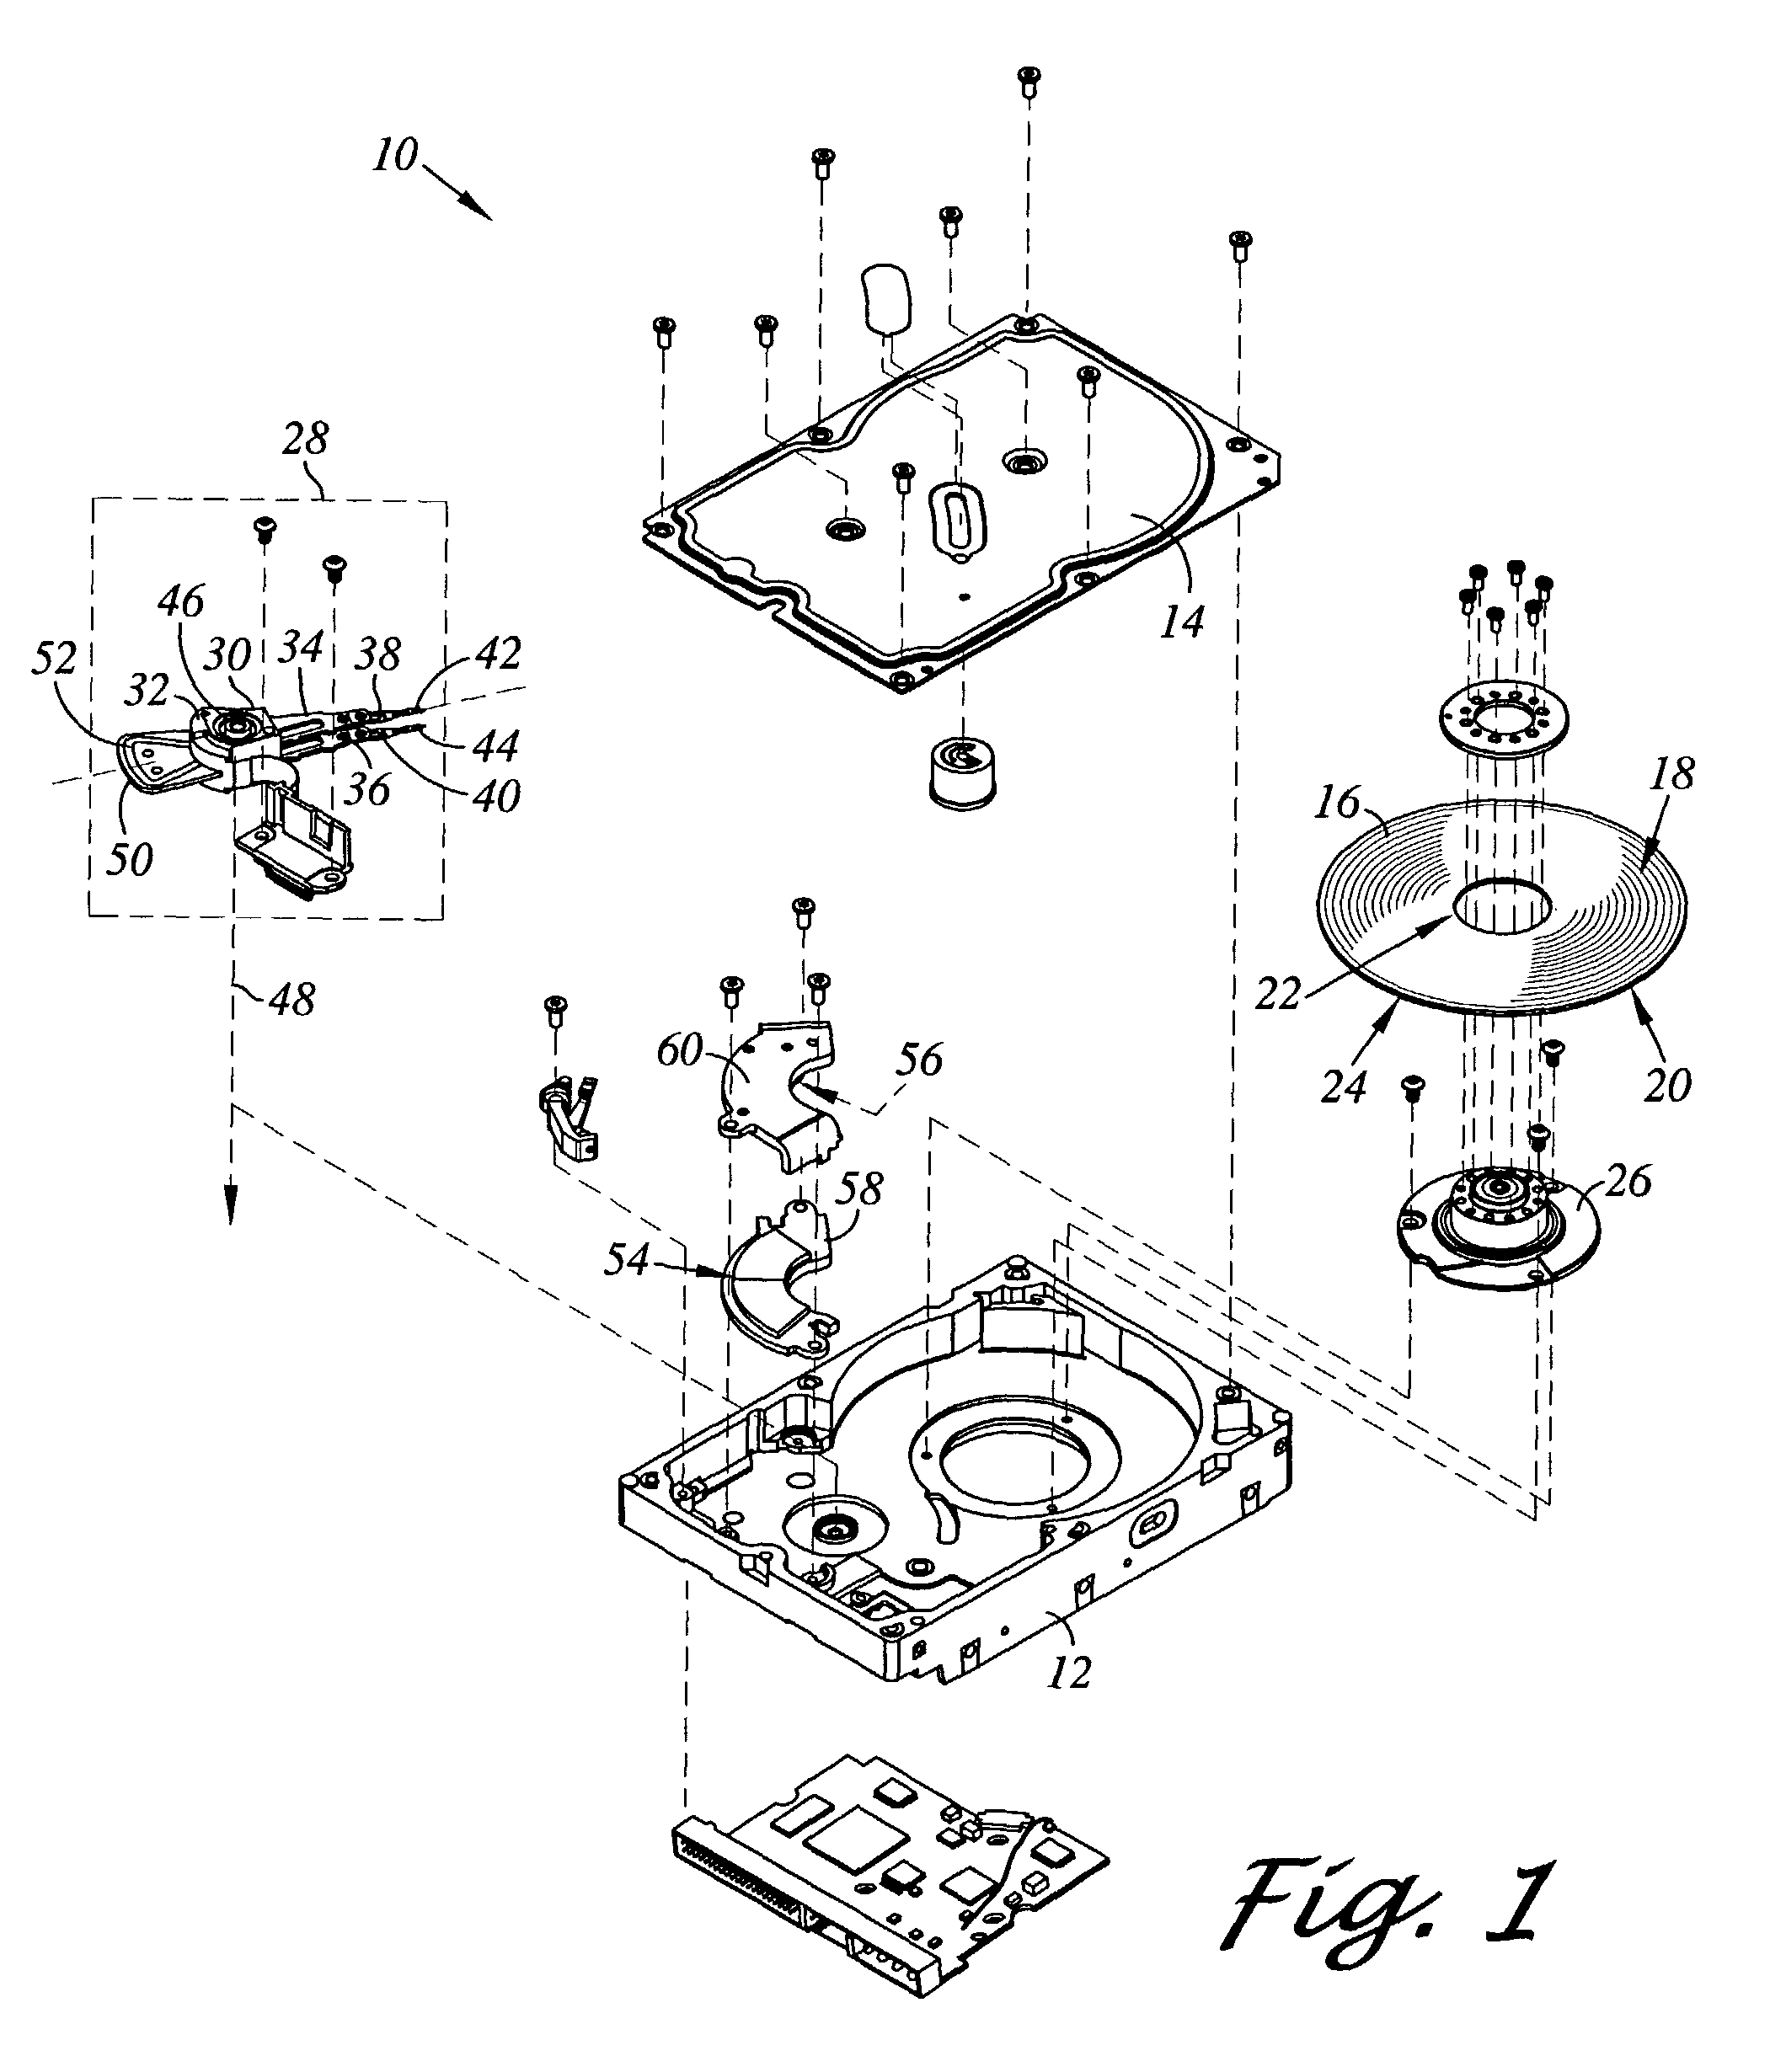 Disk drive suspension assembly including a base plate with mass reduction openings at distal corners